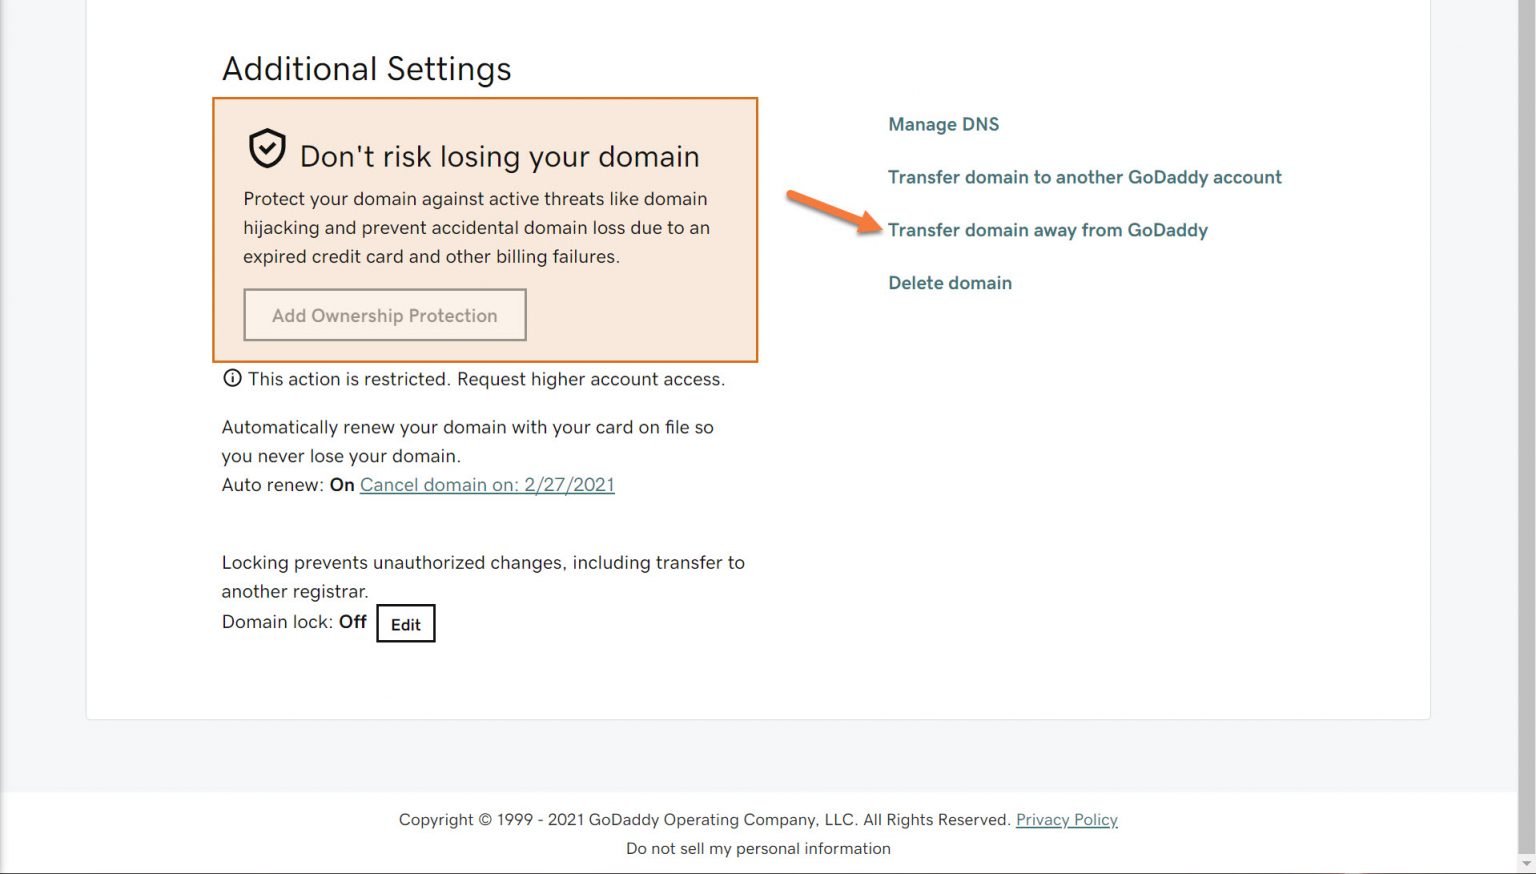 How To Transfer A Domain From GoDaddy